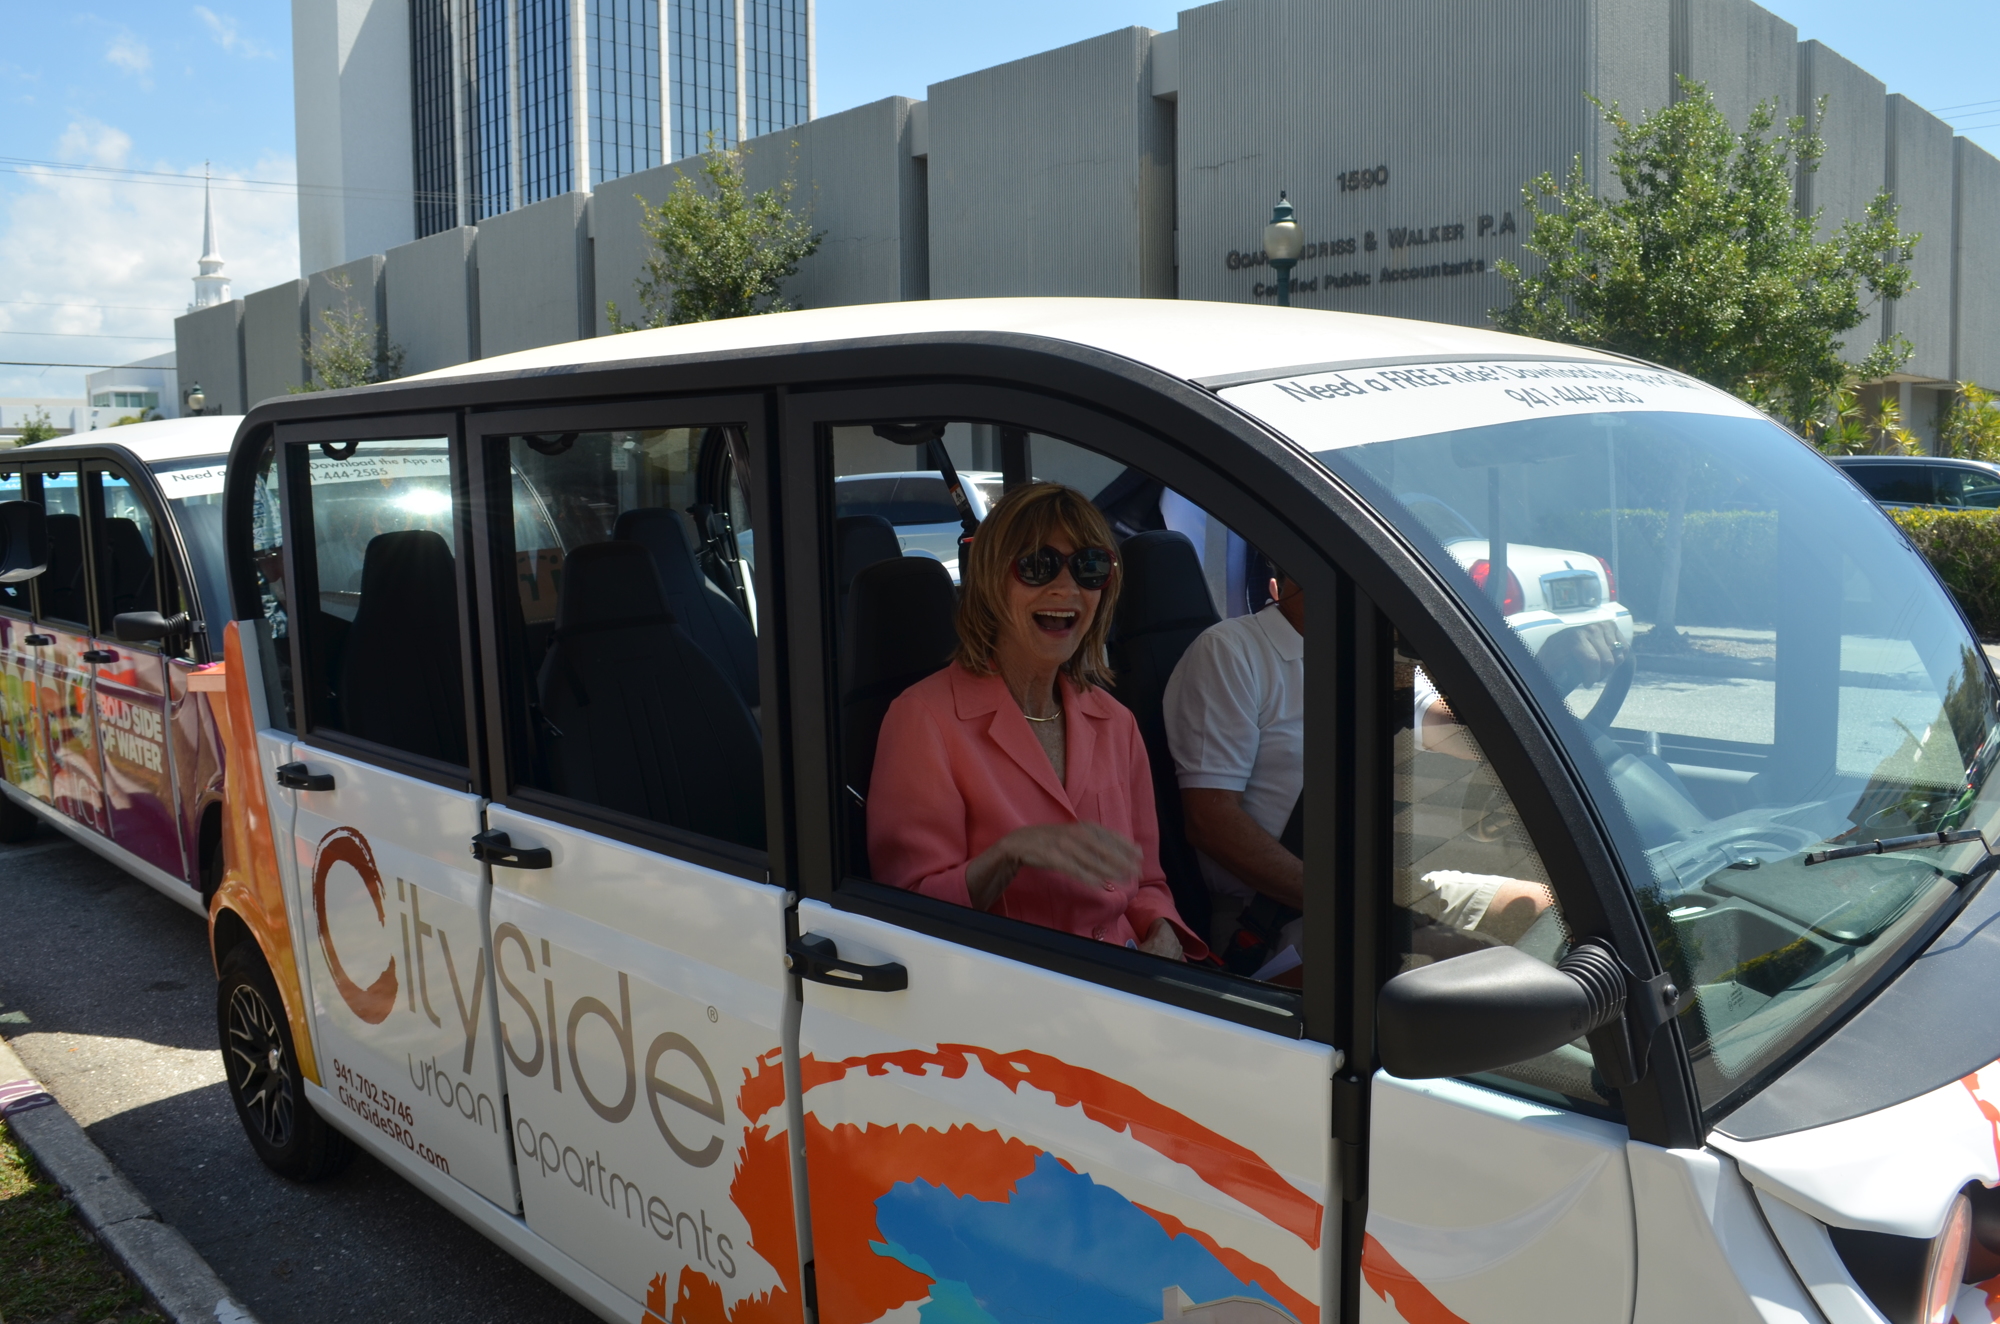 City leaders such as Commissioner Suzanne Atwell were energetic about iRide Sarasota when it launched earlier this month. The transit operator is taking it slow as it adjusts to a new market.